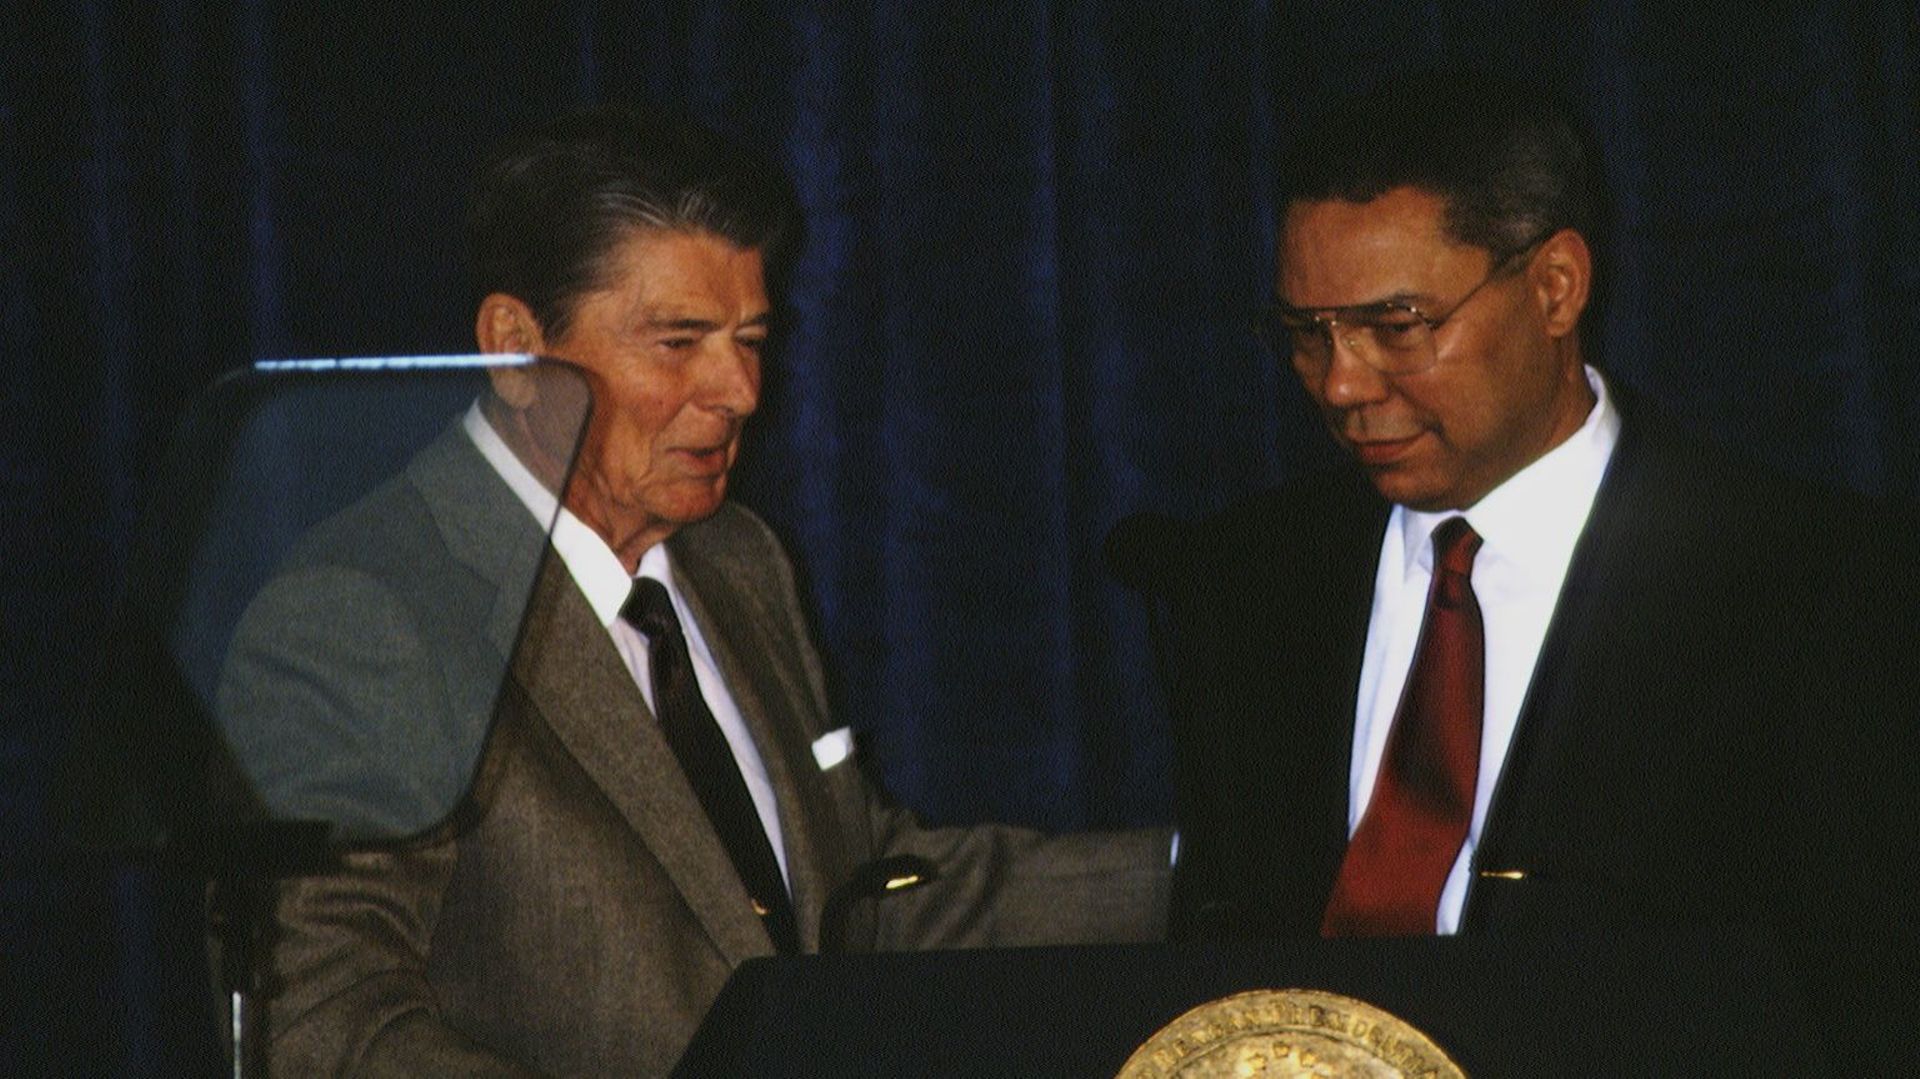 REAGAN PRESENTS C. POWELL WITH THE MEDAL OF FREEDOM